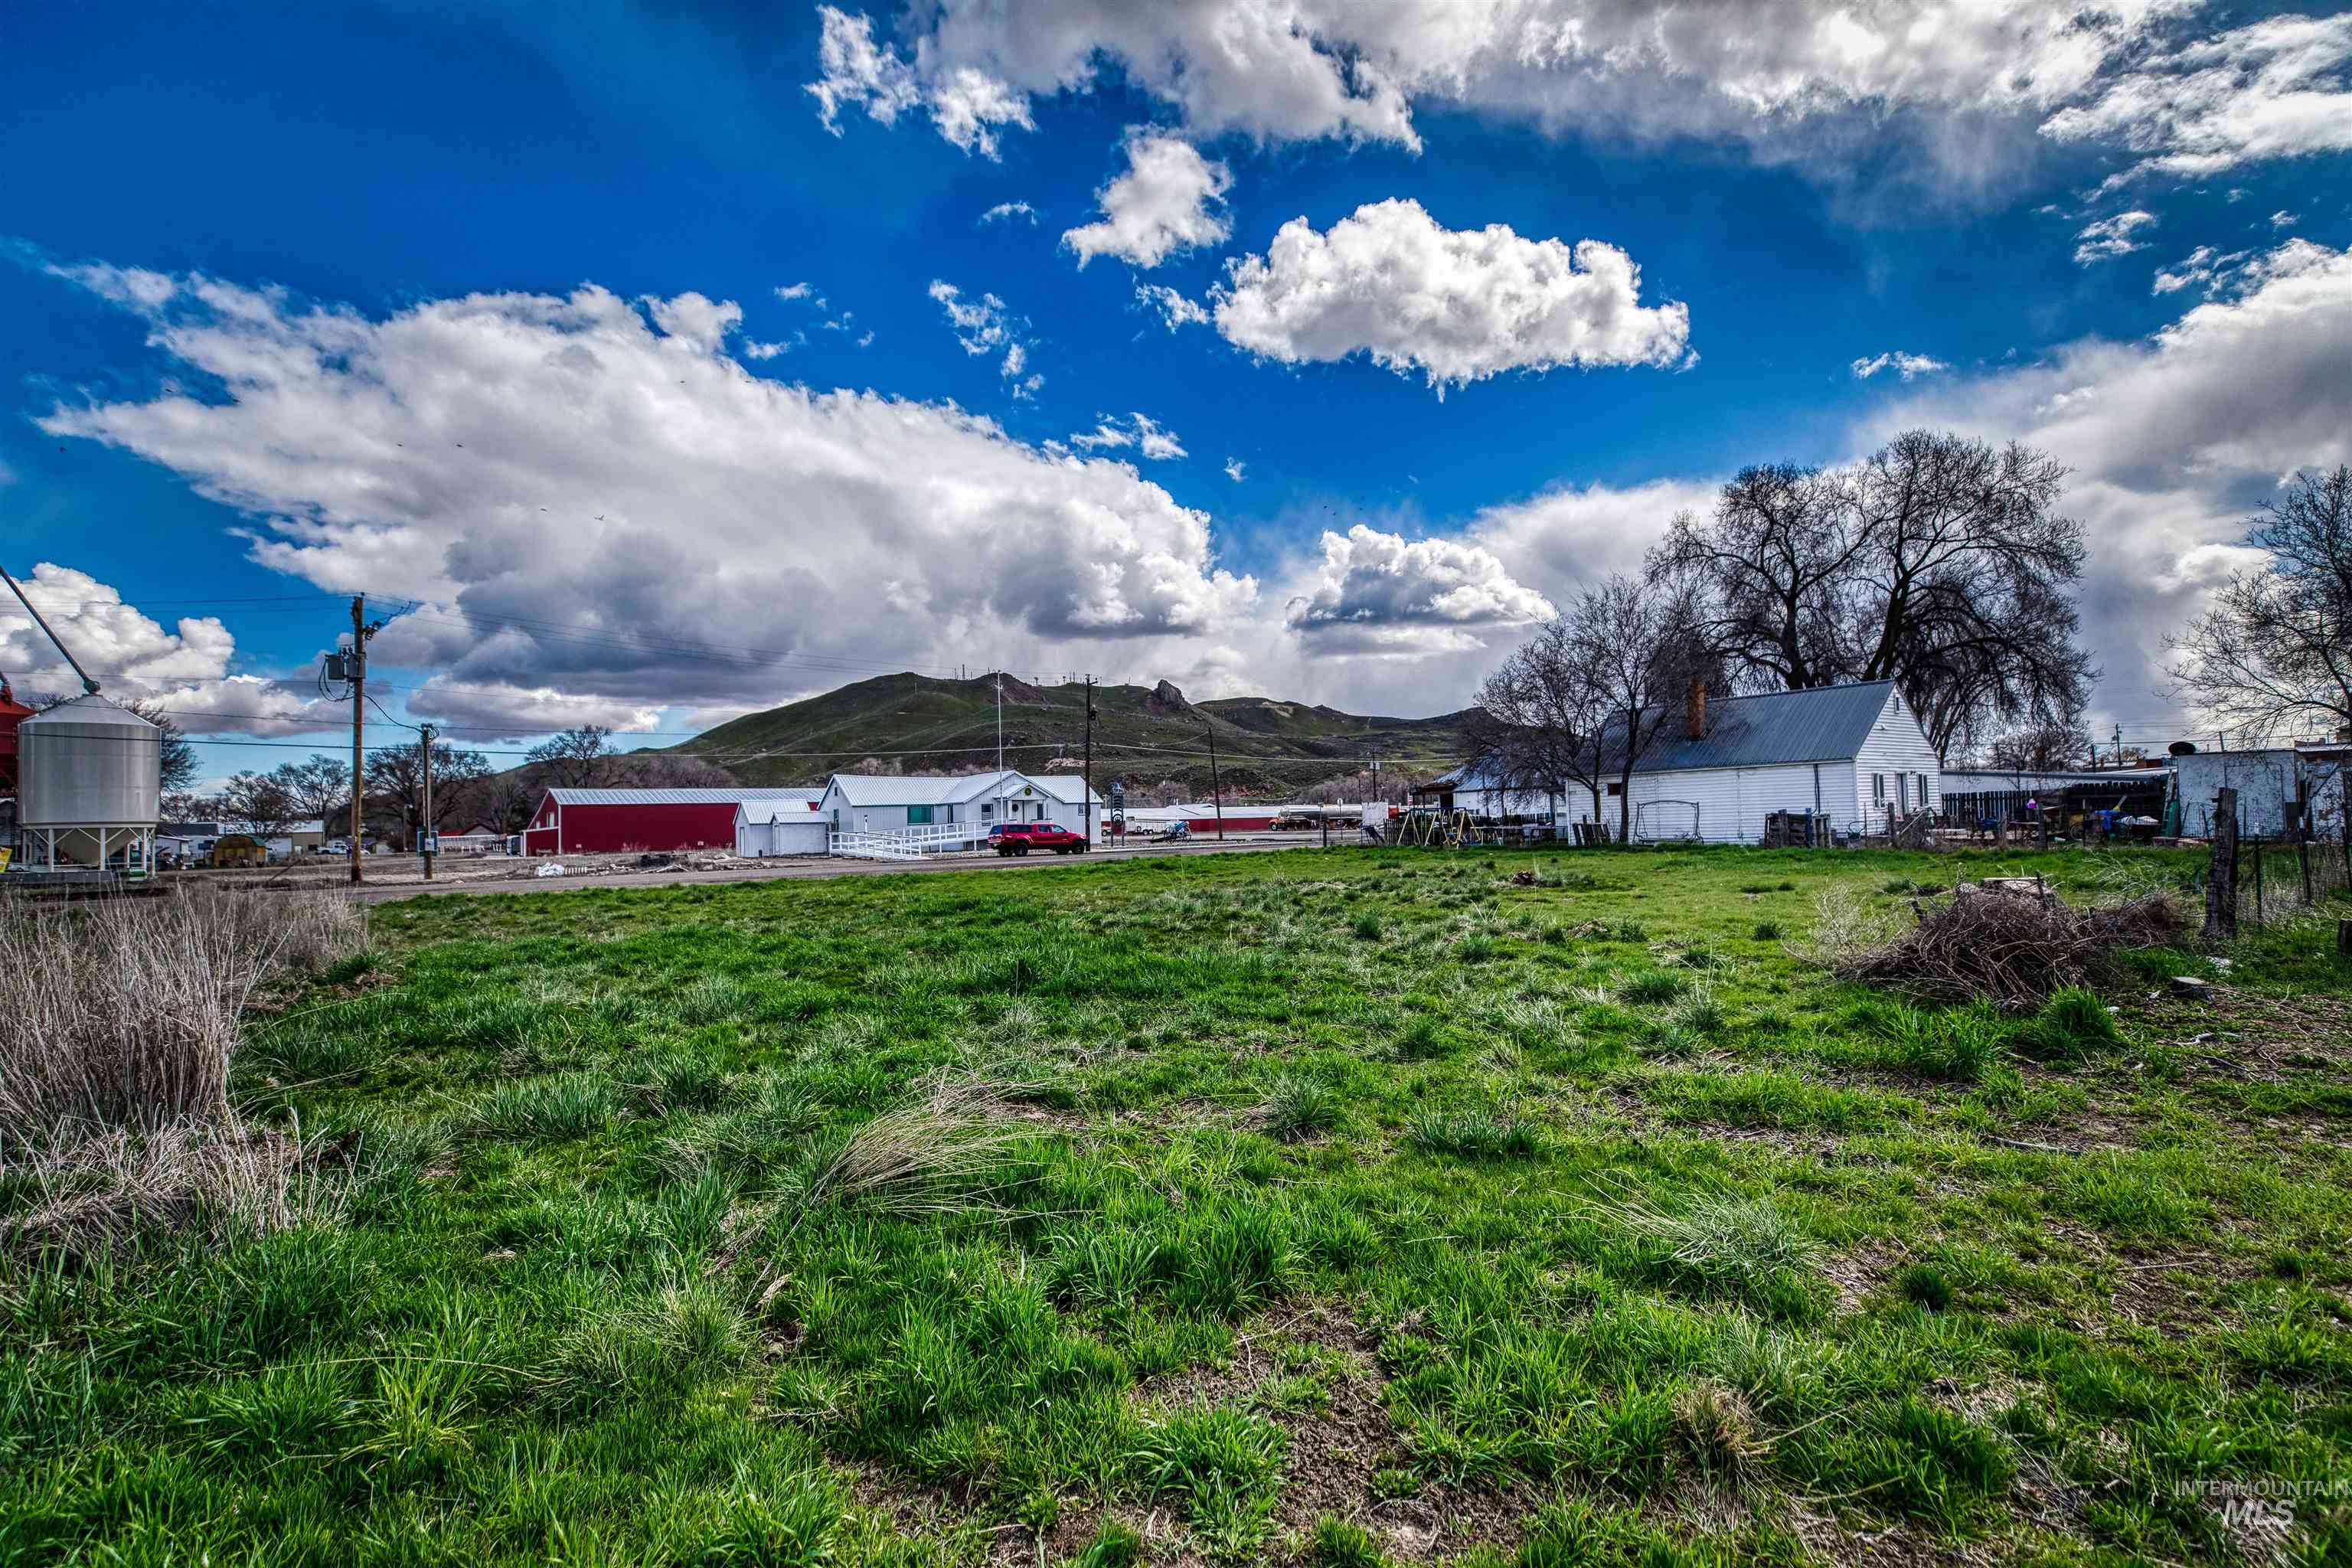 TBD Main St (tax lot 101), Vale, Oregon 97918, Land For Sale, Price $15,000,MLS 98904743